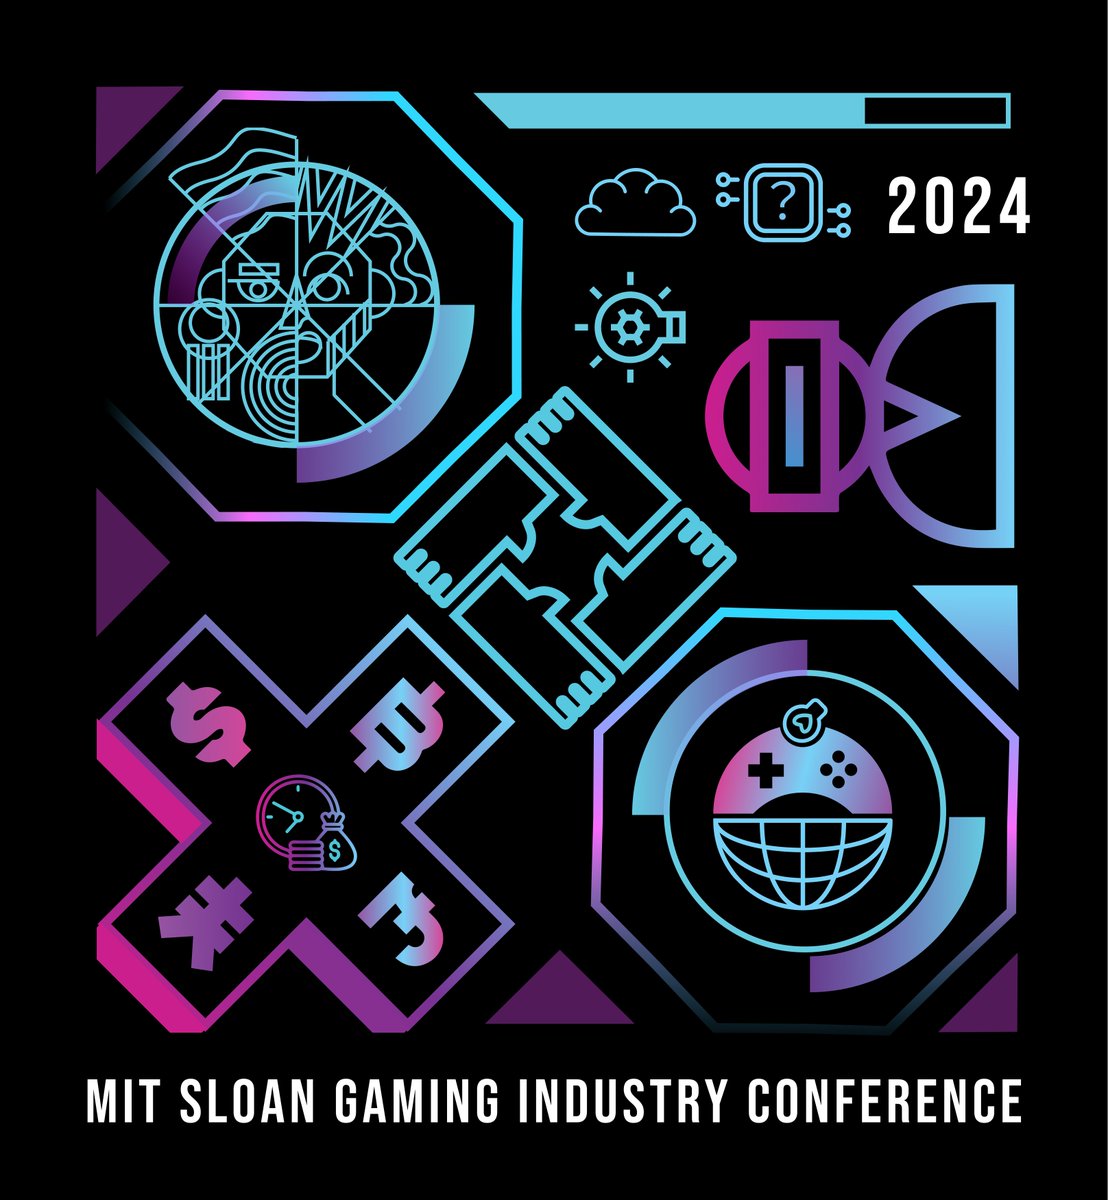 D-1 MGICON24 PAMPHLET RELEASE. We're loading up...
sloangroups.mit.edu/sgic/topics-an…

#MGICon #MITSloan #MIT #dei #gaming #gamedev #gamedesign #gamingnews #gamingcommunity #videogames